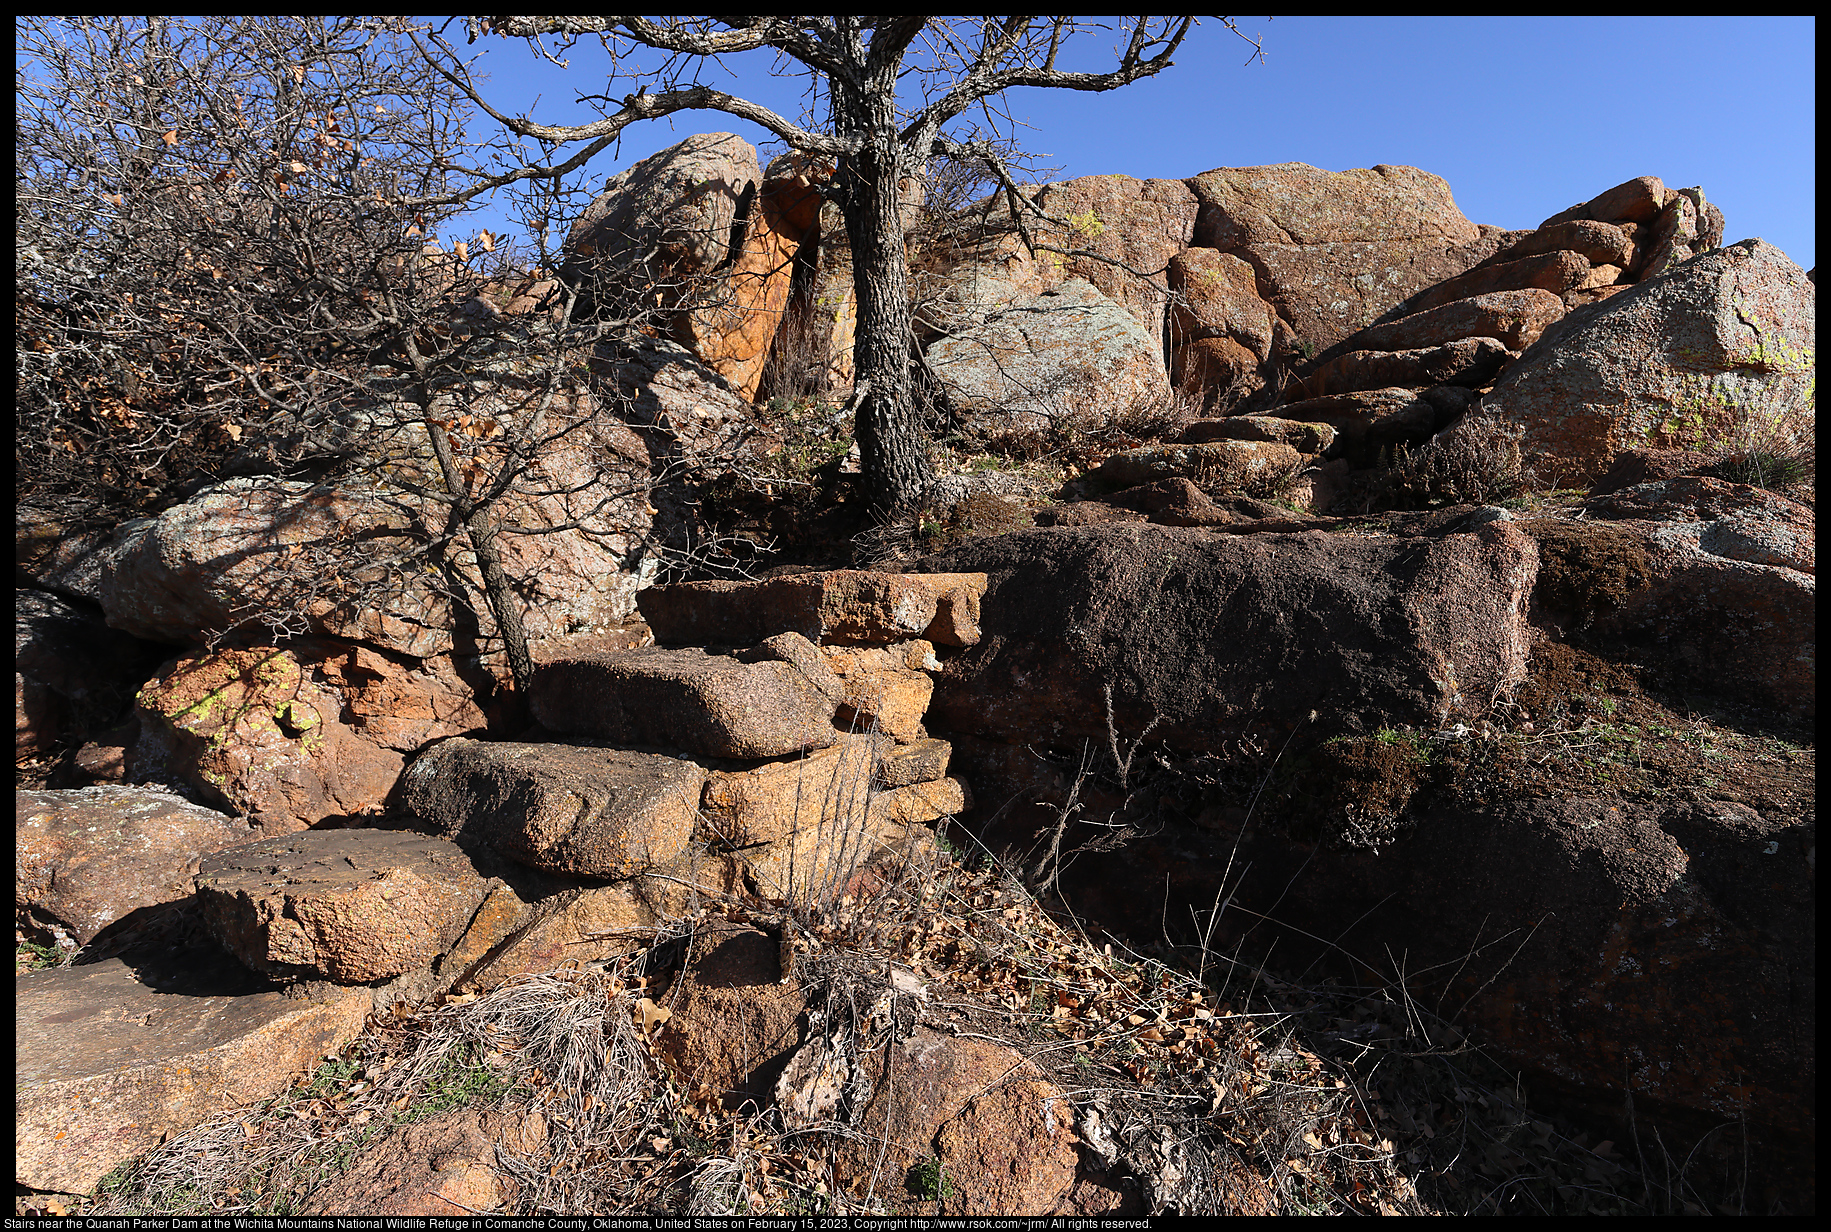 Stairs near the Quanah Parker Dam at the Wichita Mountains National Wildlife Refuge in Comanche County, Oklahoma, United States on February 15, 2023